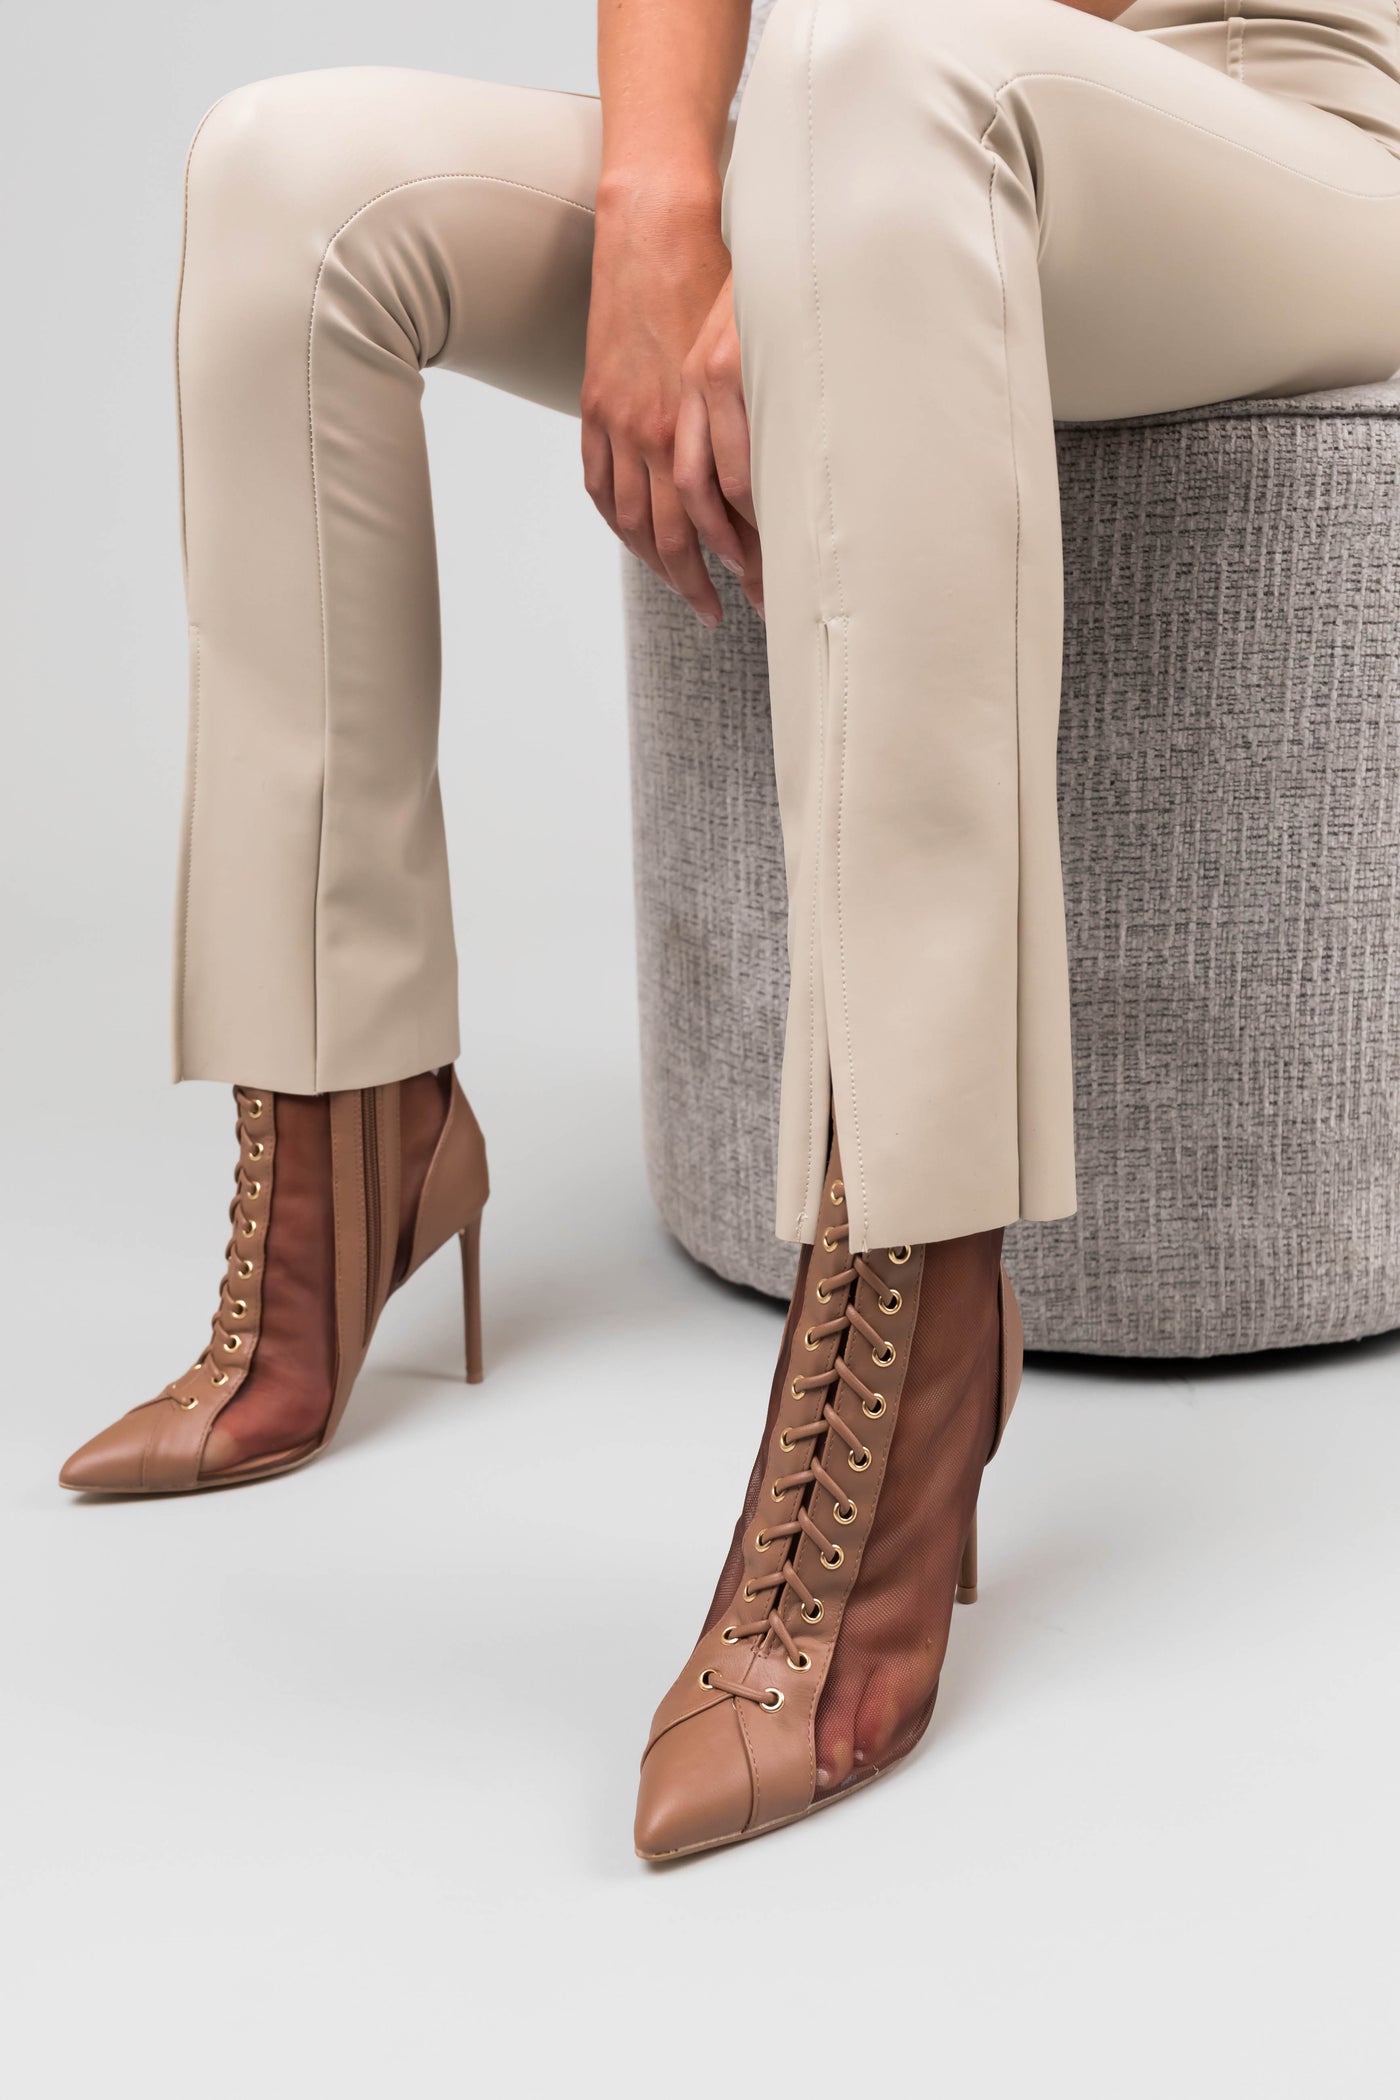 Mocha Sheer Mesh Lace Up Stiletto Booties